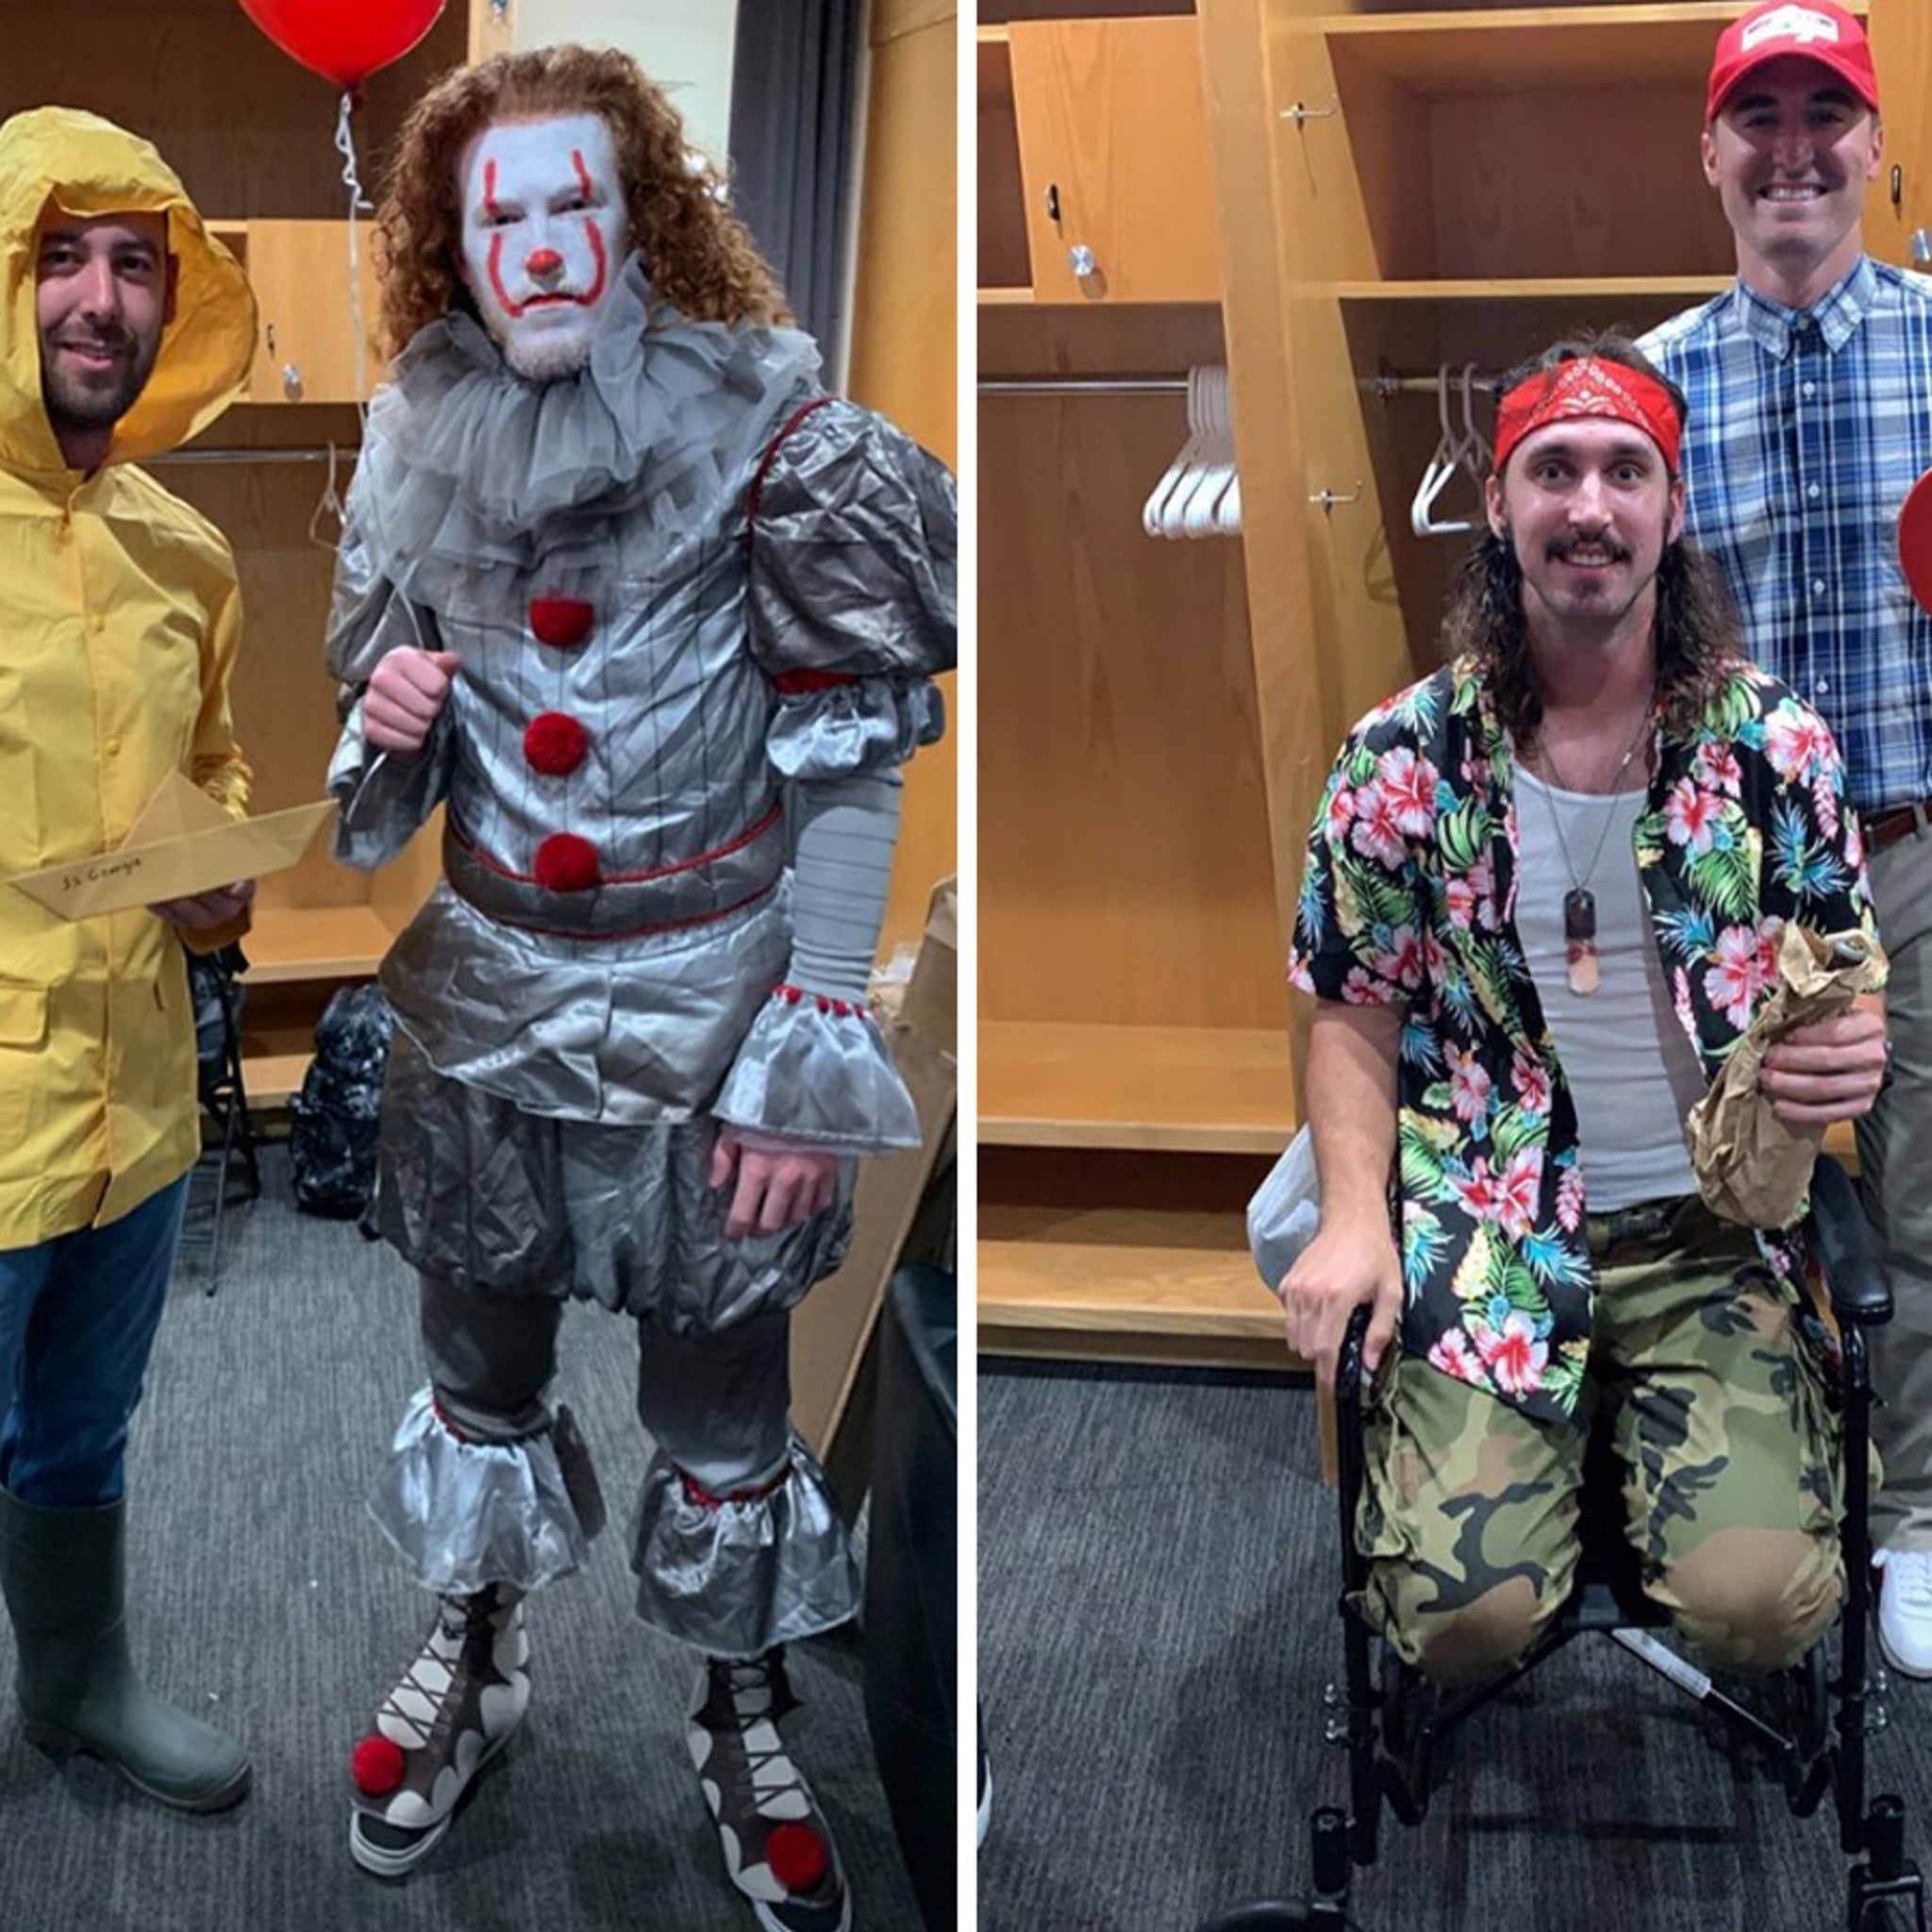 Dodgers Wear Costumes For Annual Team Dress-Up Day, 'Drip Too Hard